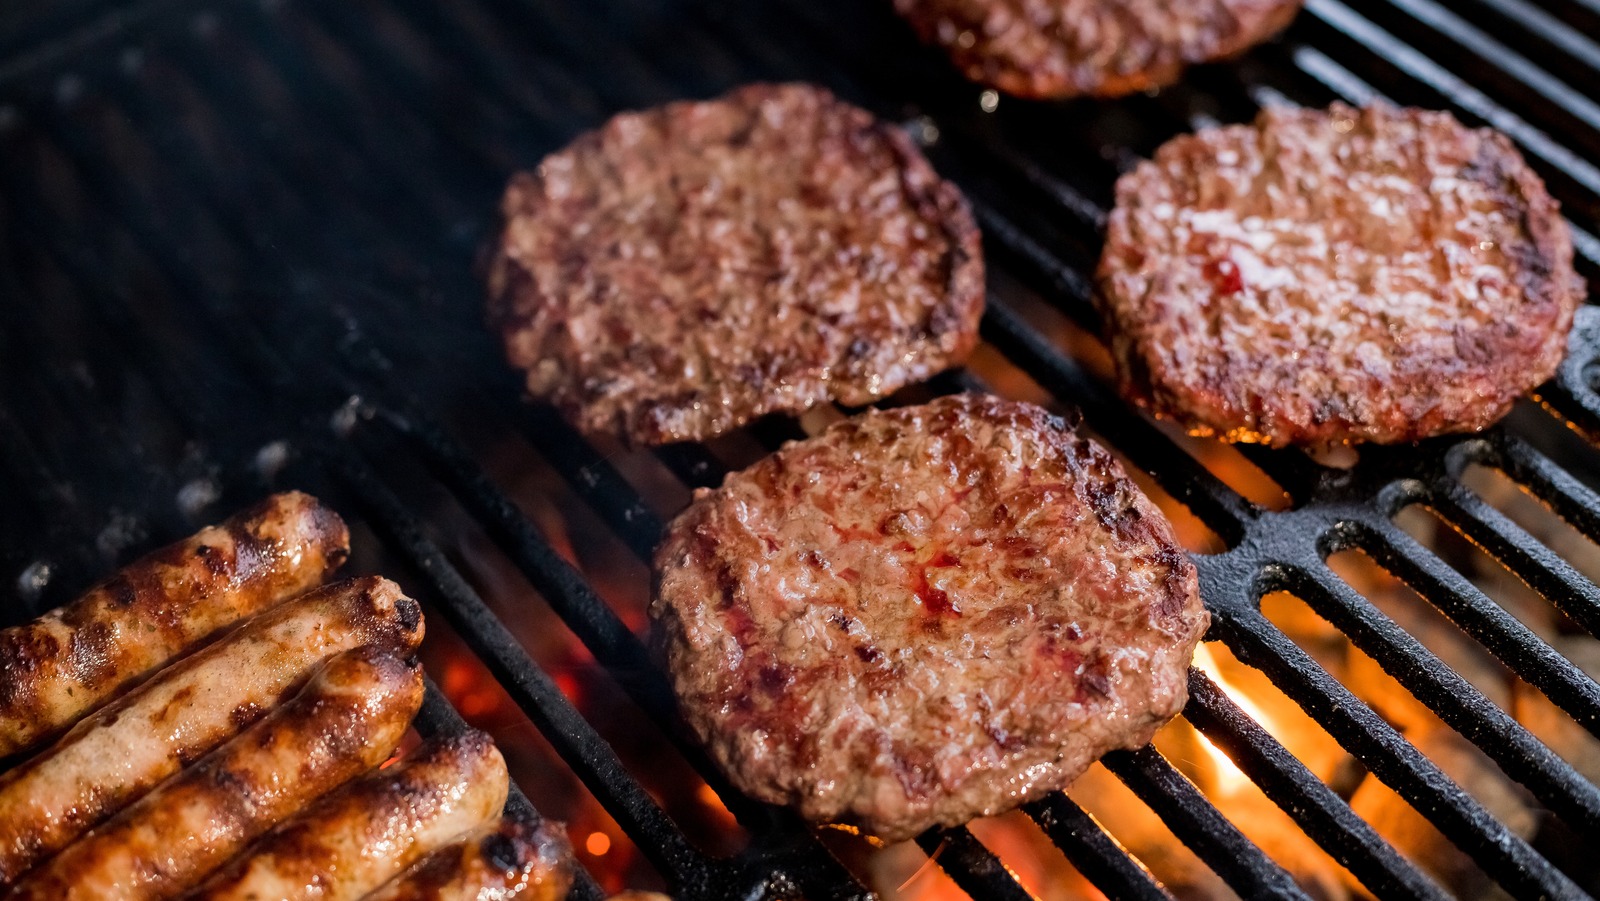 How to Grill Burgers on a Charcoal Grill 